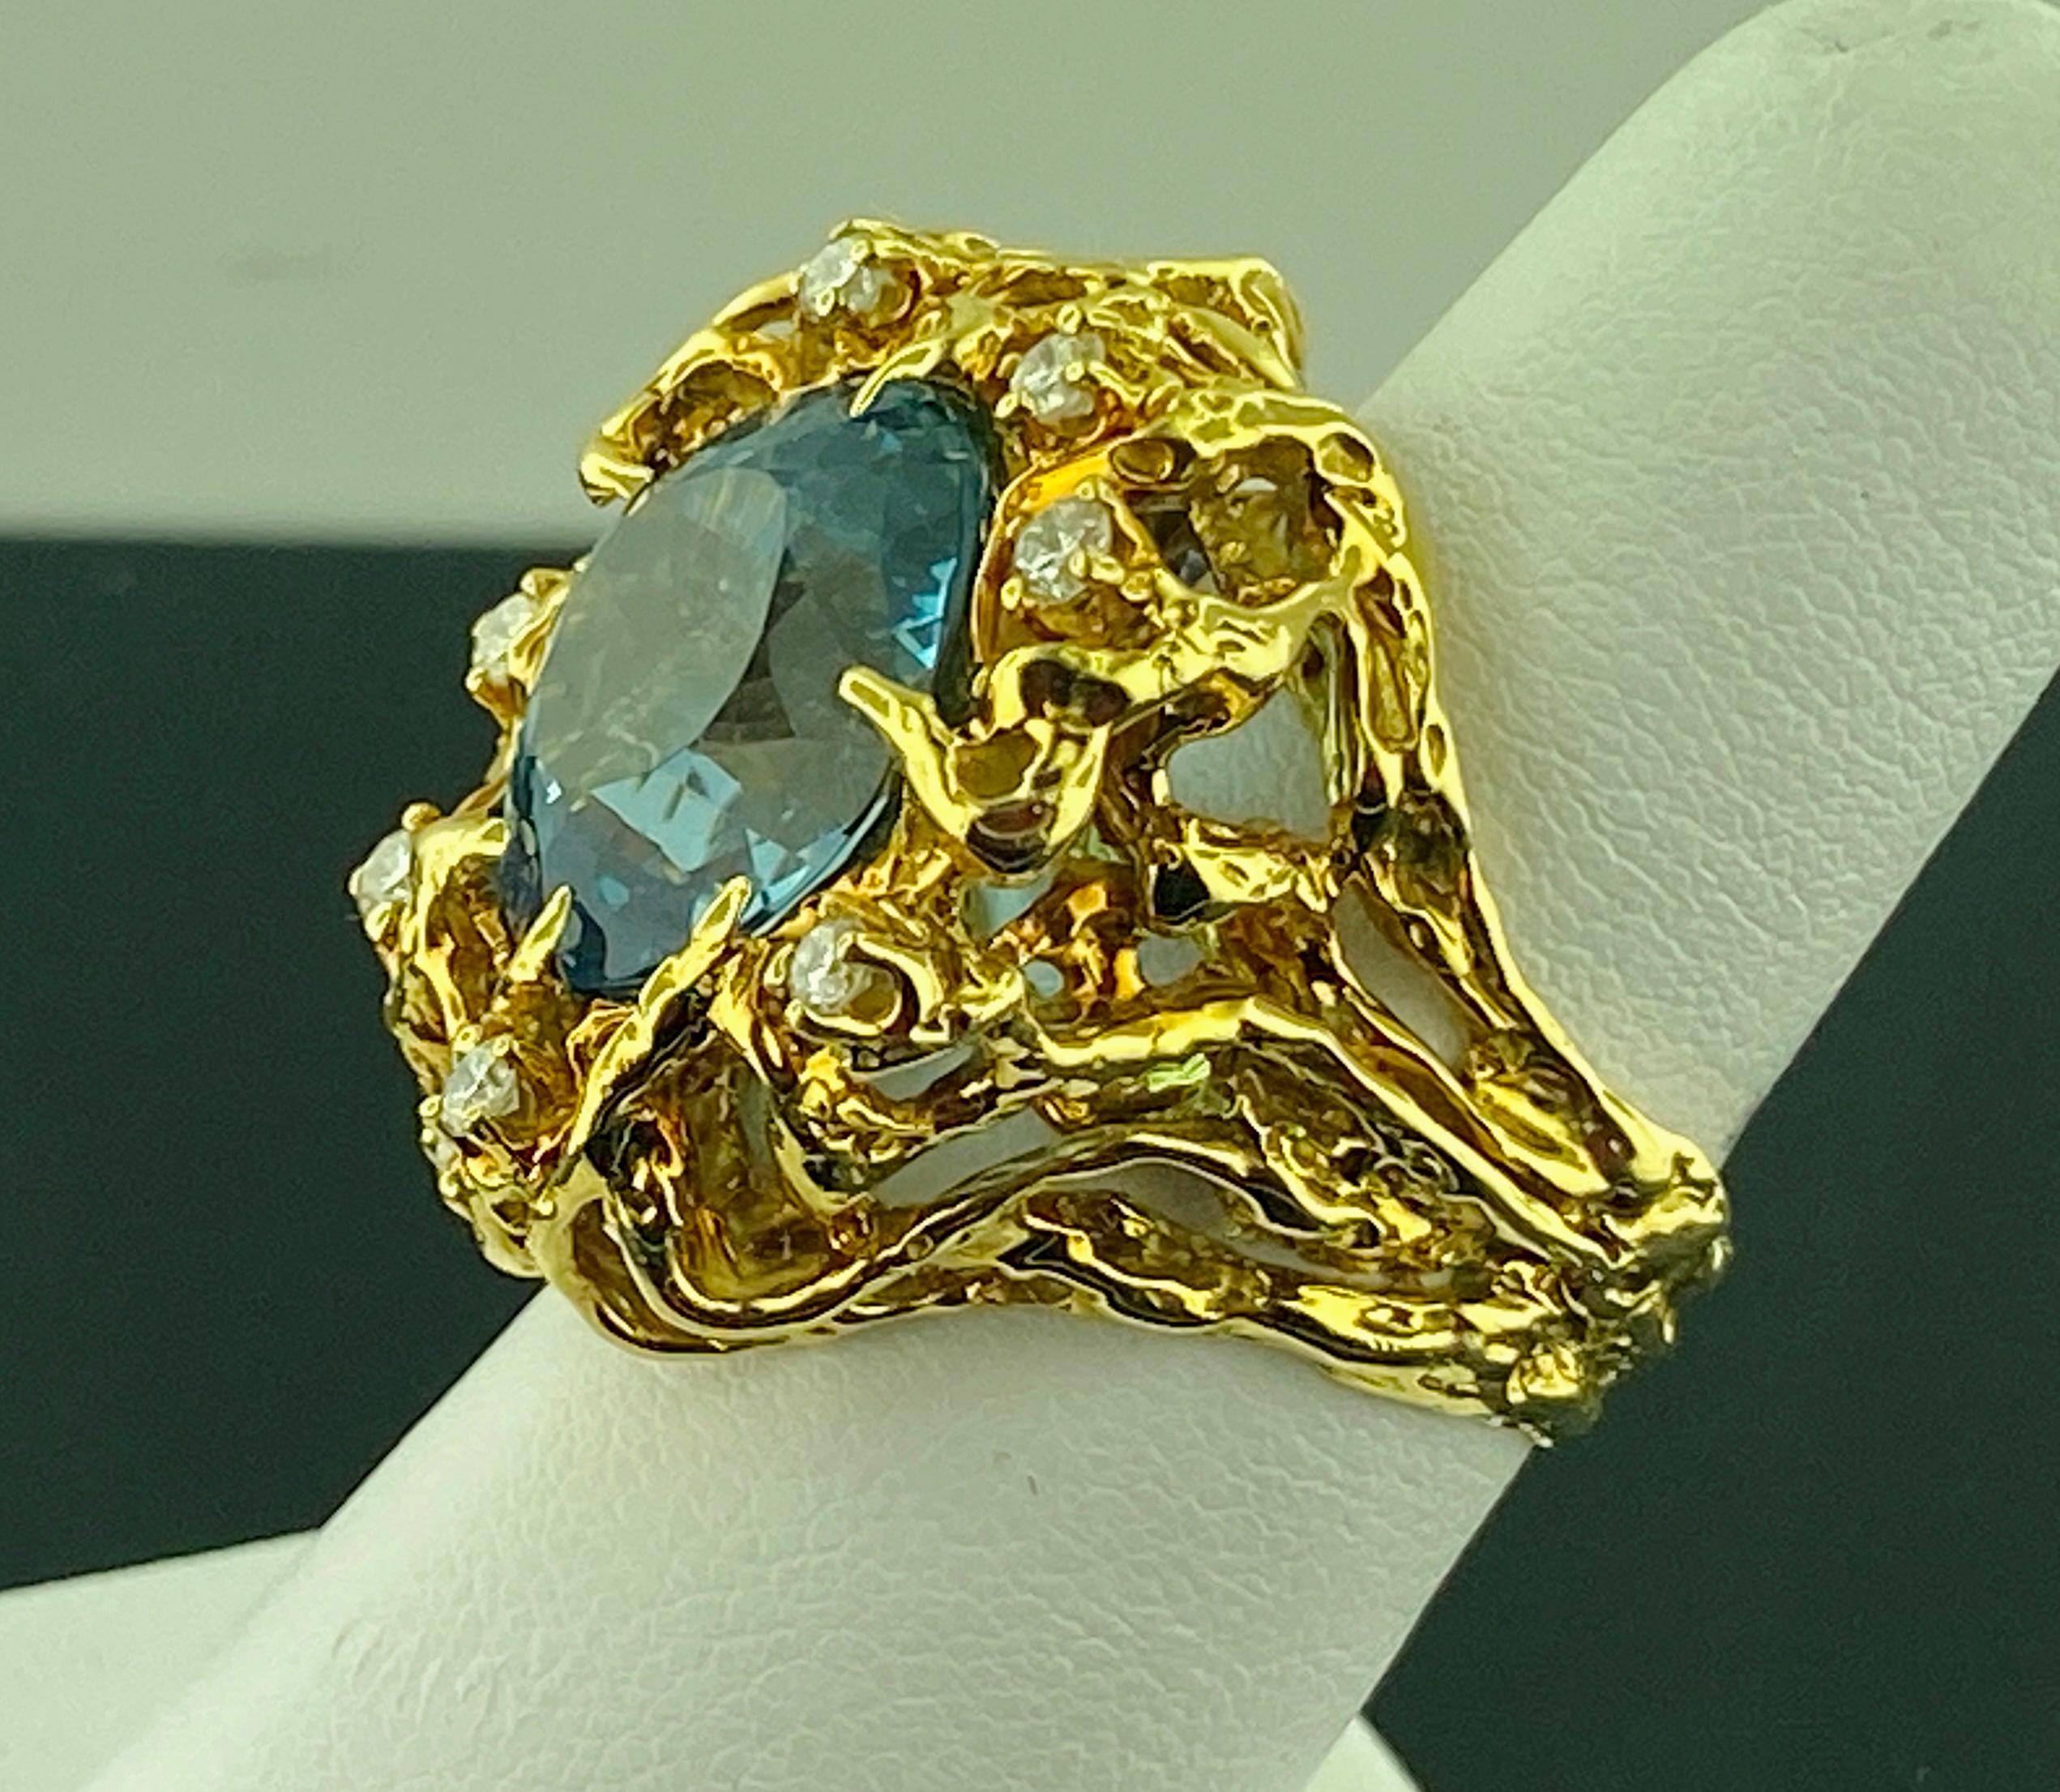 Set in 18 karat yellow gold, weighing 21 grams, is a 10 carat Round Cut Aquamarine highlighted with 8 Round Brilliant Cut diamonds weighing 0.35 carats, Color Grade of: G-H, Clarity Grade of: SI-1.  Ring size is 8.